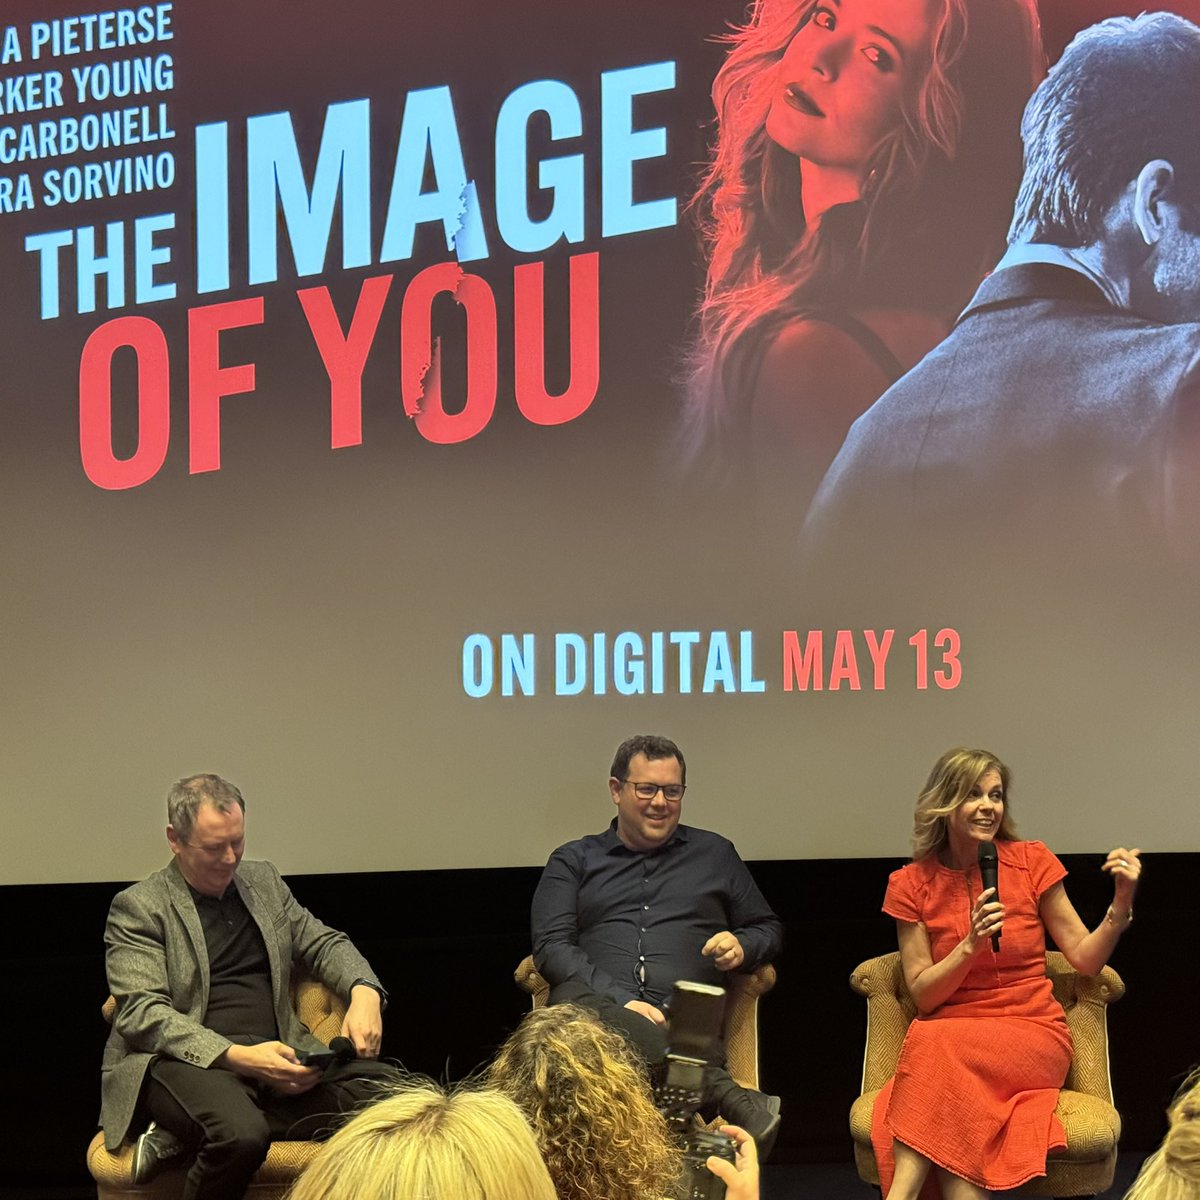 Thank you @adeleparks @headlinepg and @ParamountPics for a great evening watching the fabulous #TheImageOfYou. Available on digital from Monday.